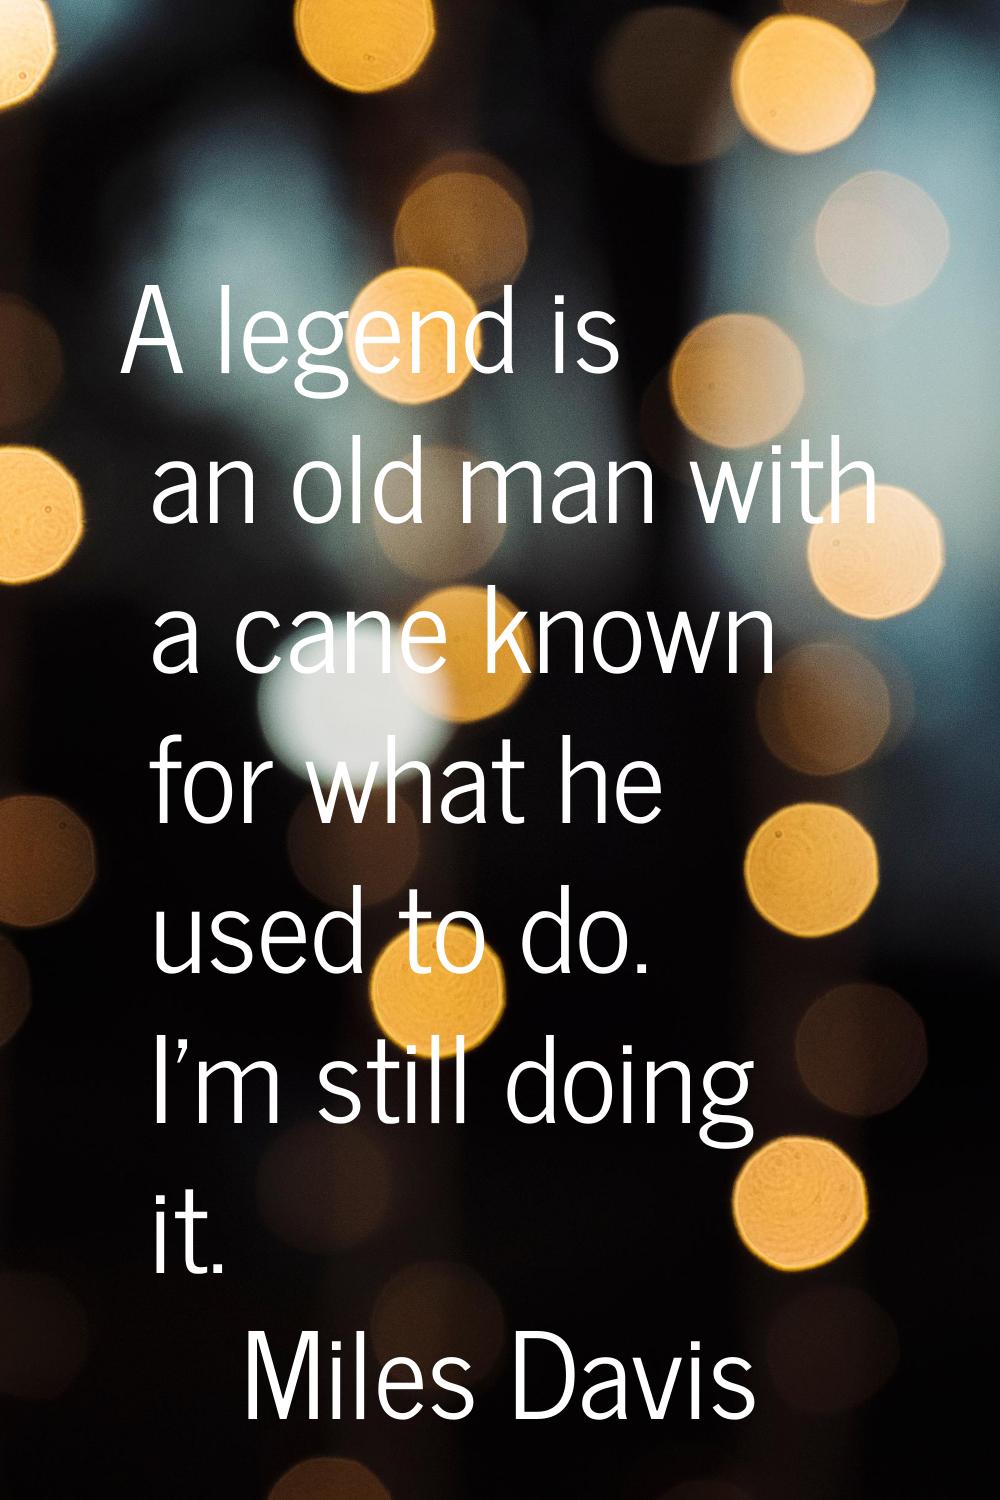 A legend is an old man with a cane known for what he used to do. I'm still doing it.